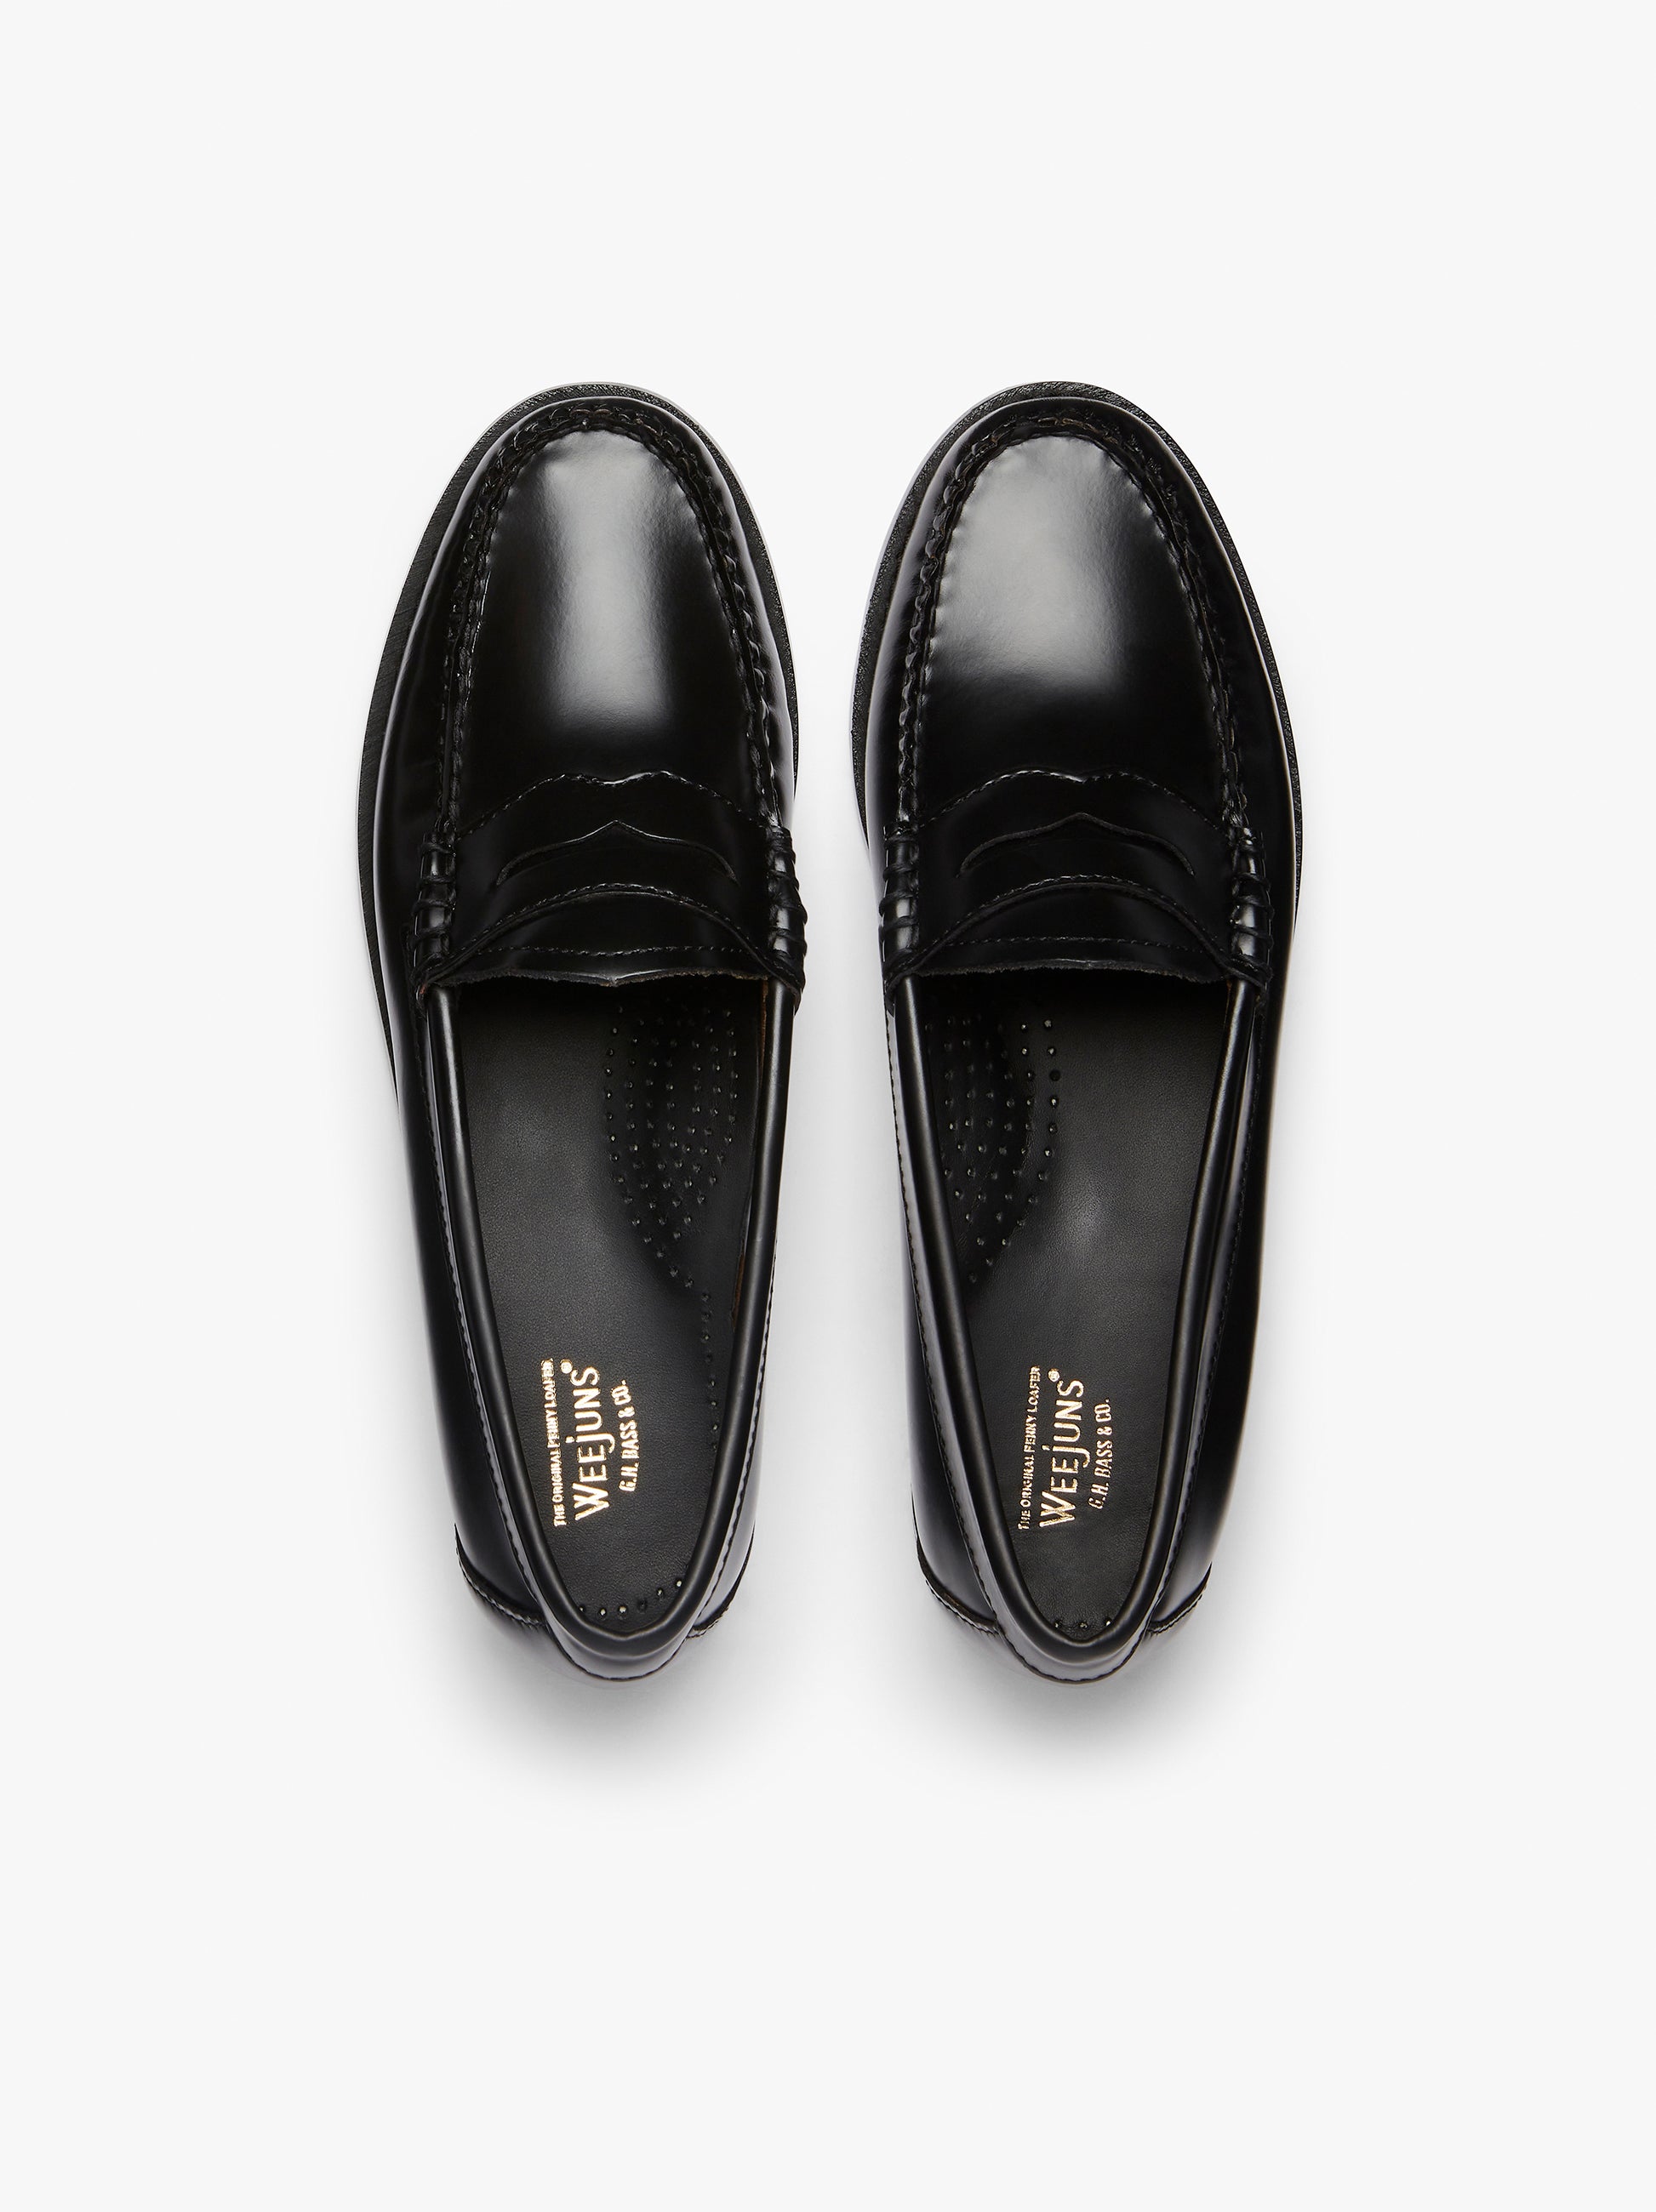 Black Penny Loafers Womens | Black Leather Penny Loafers Womens